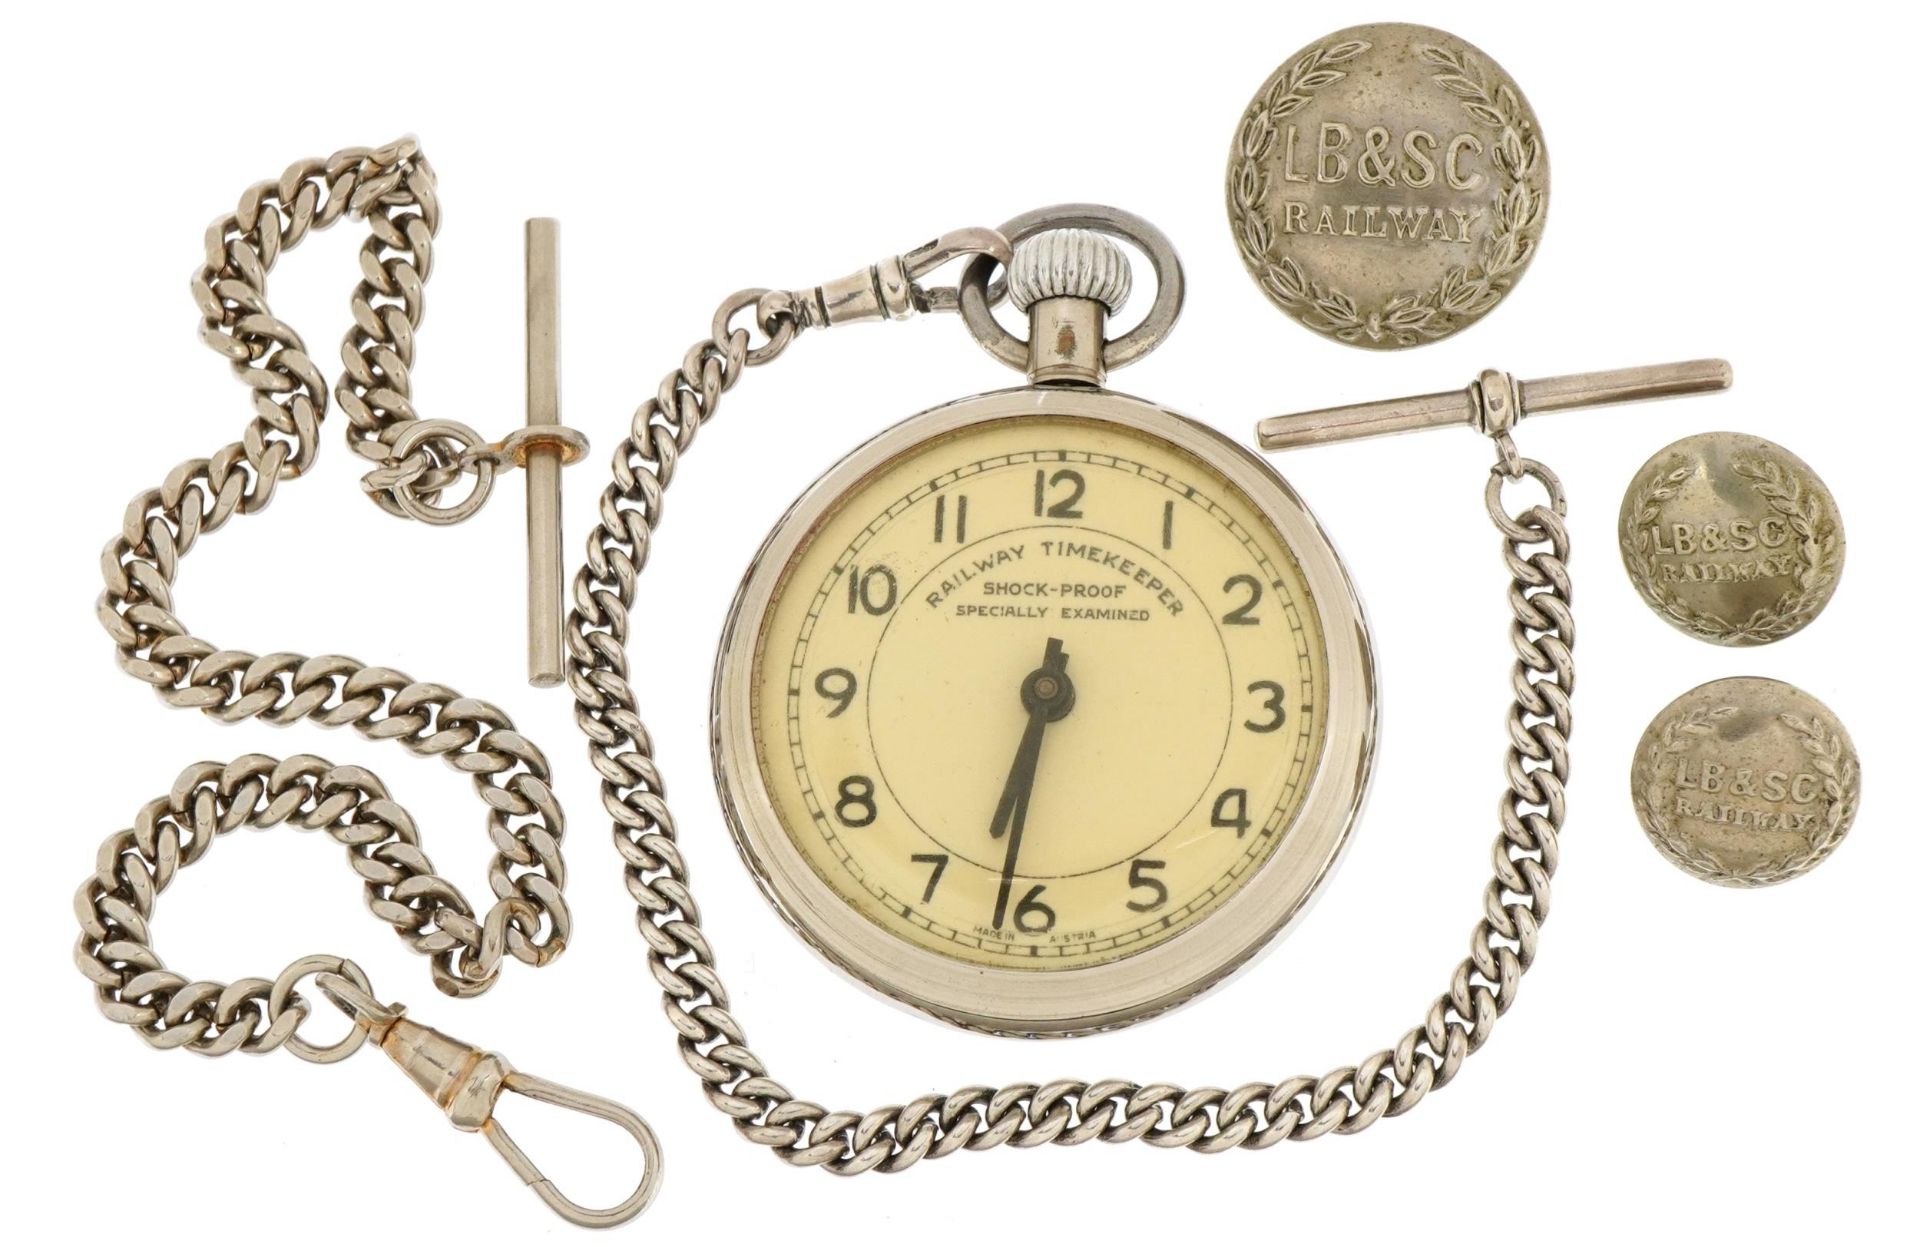 Railway Timekeeper open face pocket watch with silver watch chain, one other chain and three LB & SC